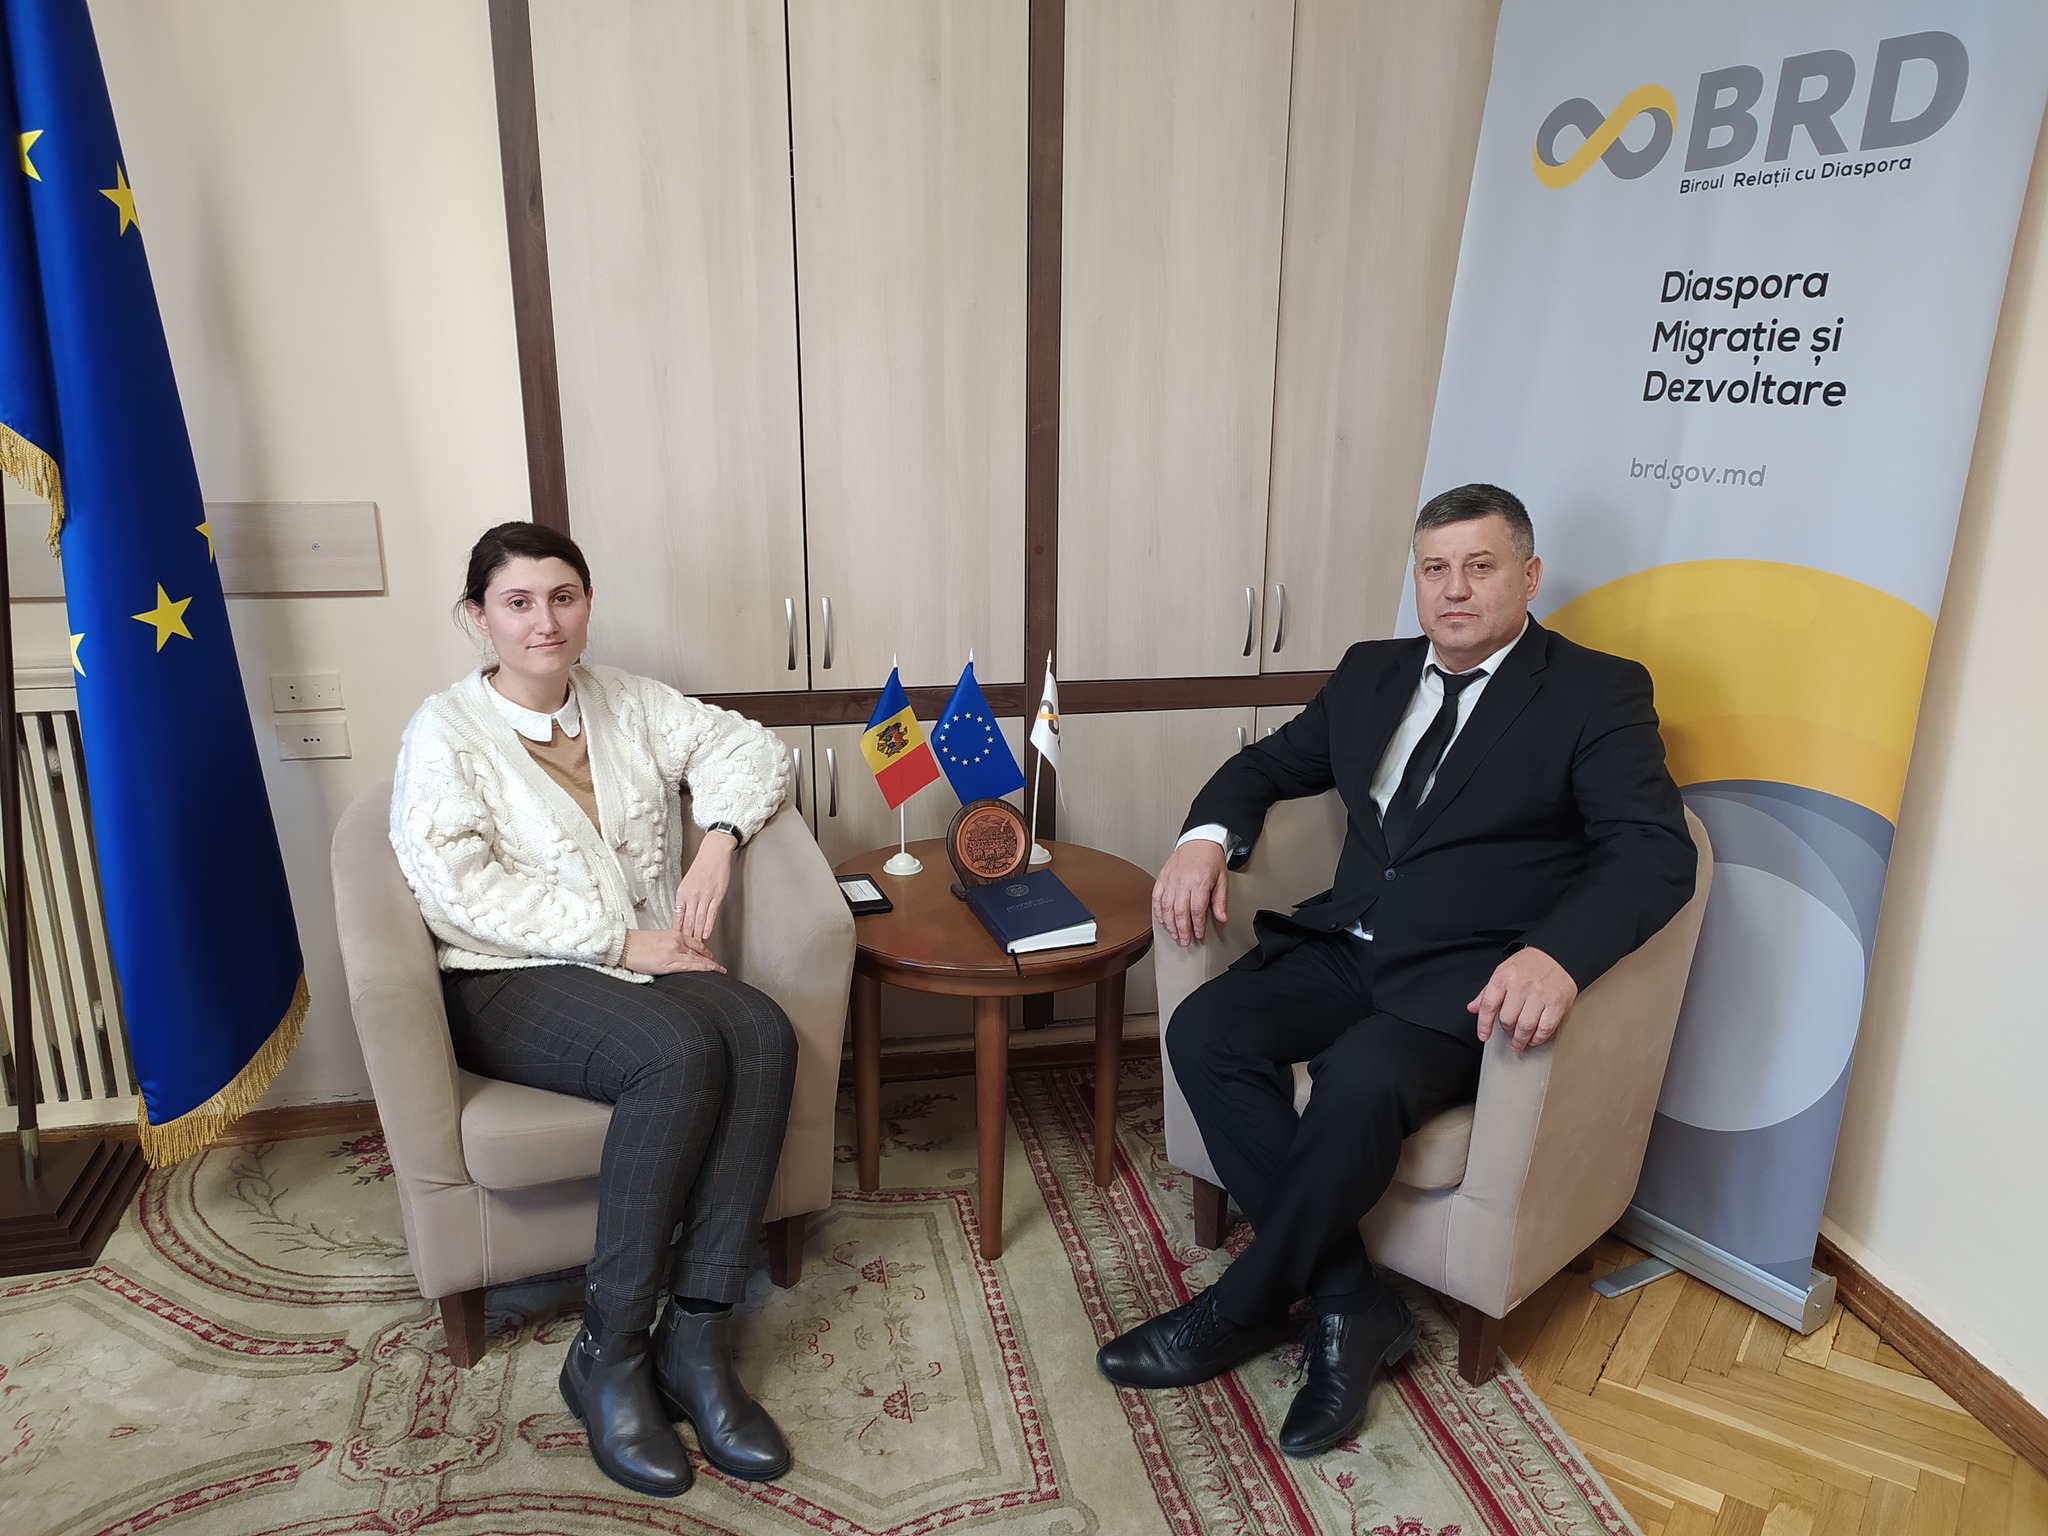 The president of the association „Friends of Bessarabia” from Bulgaria in visit at the BRD